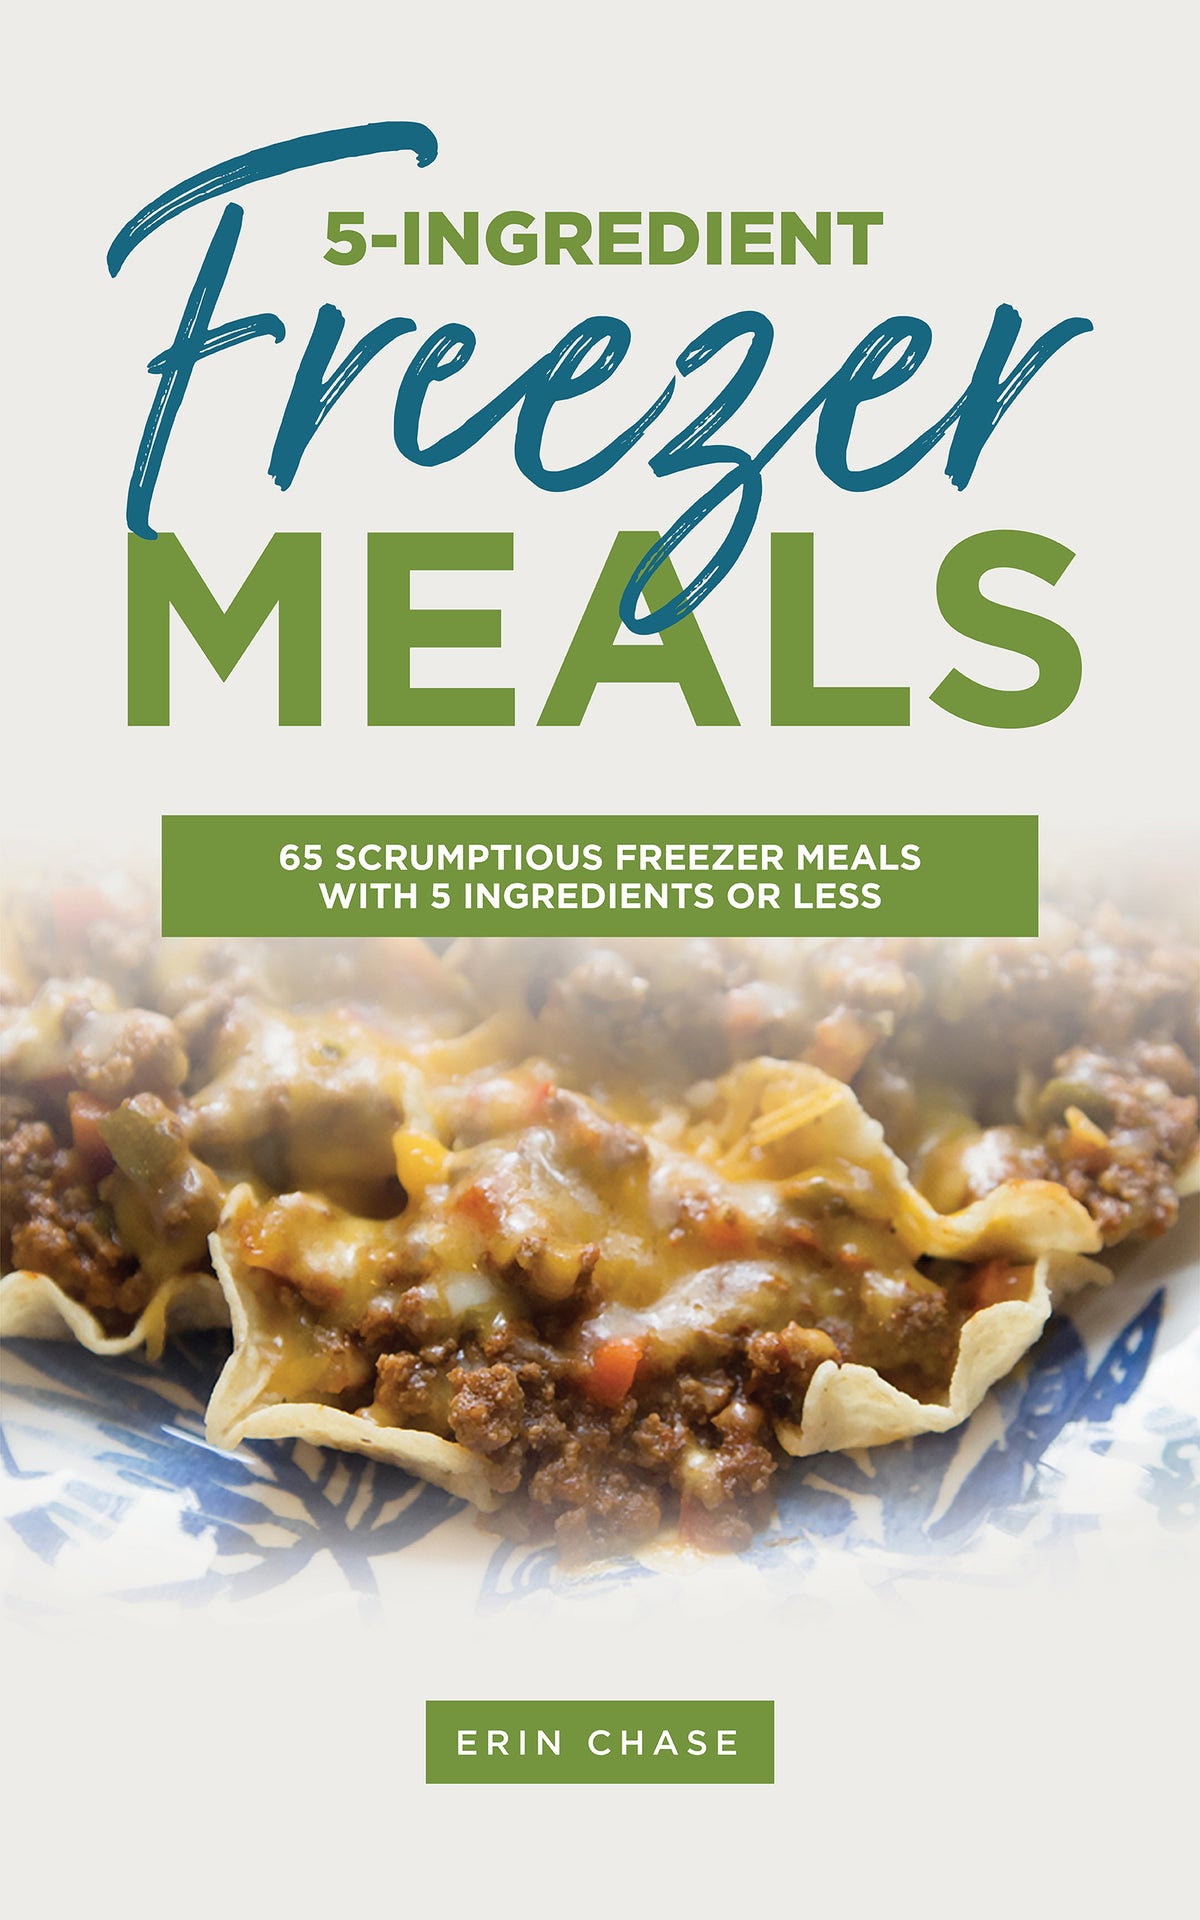 Book & Labels Kit for 15-Minute Freezer Meals - Erin Chase Store